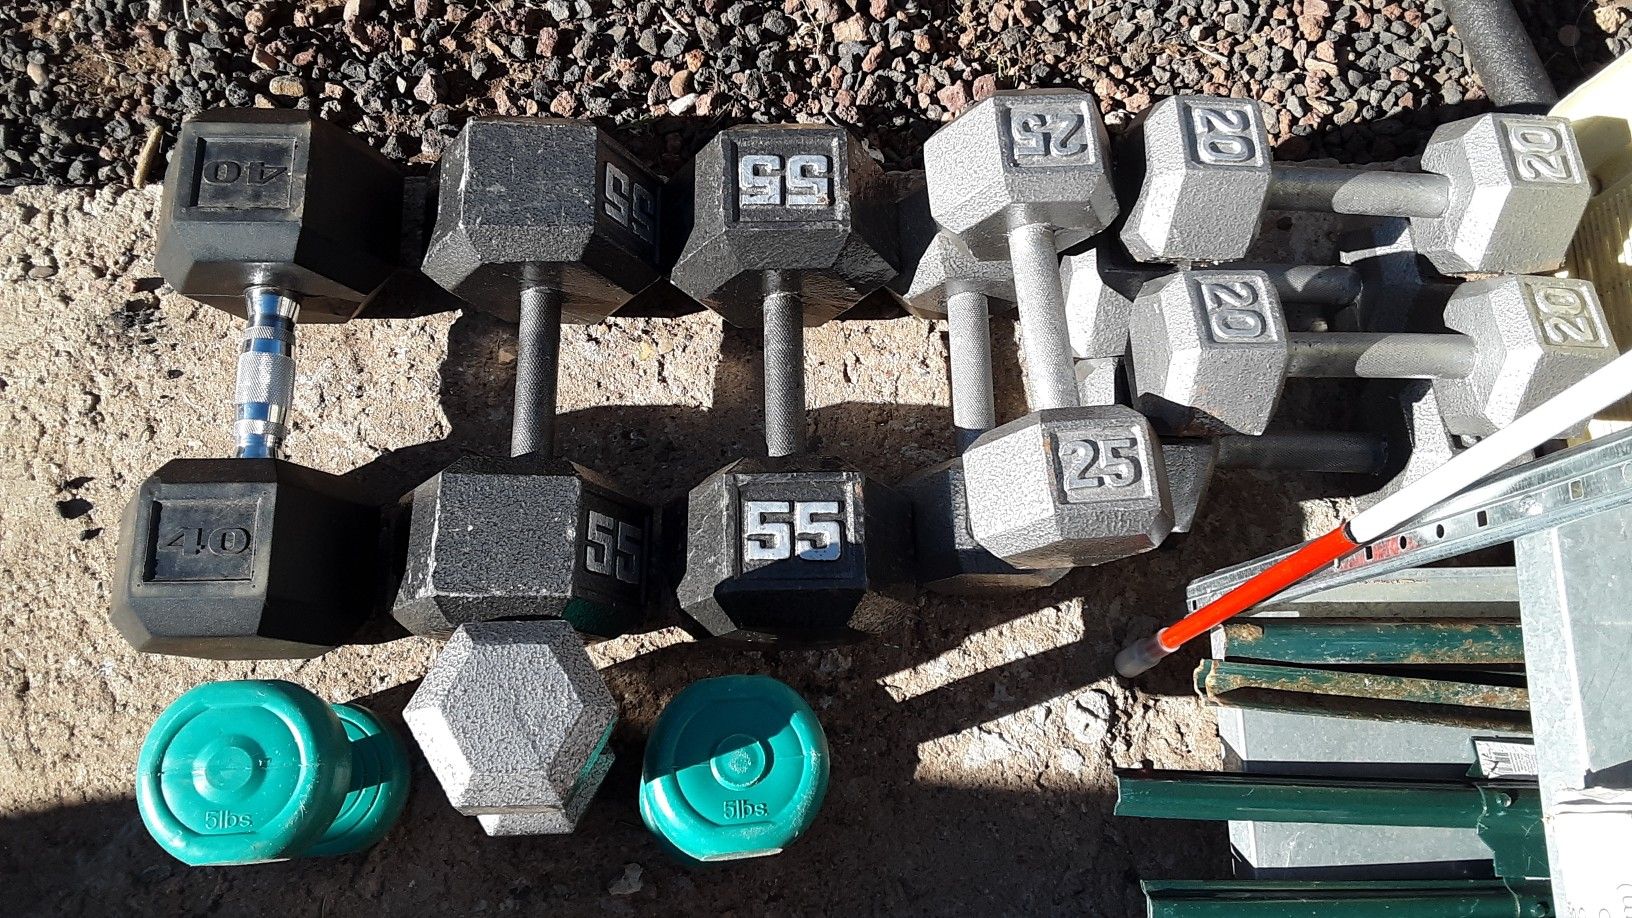 Dumbbell type weights